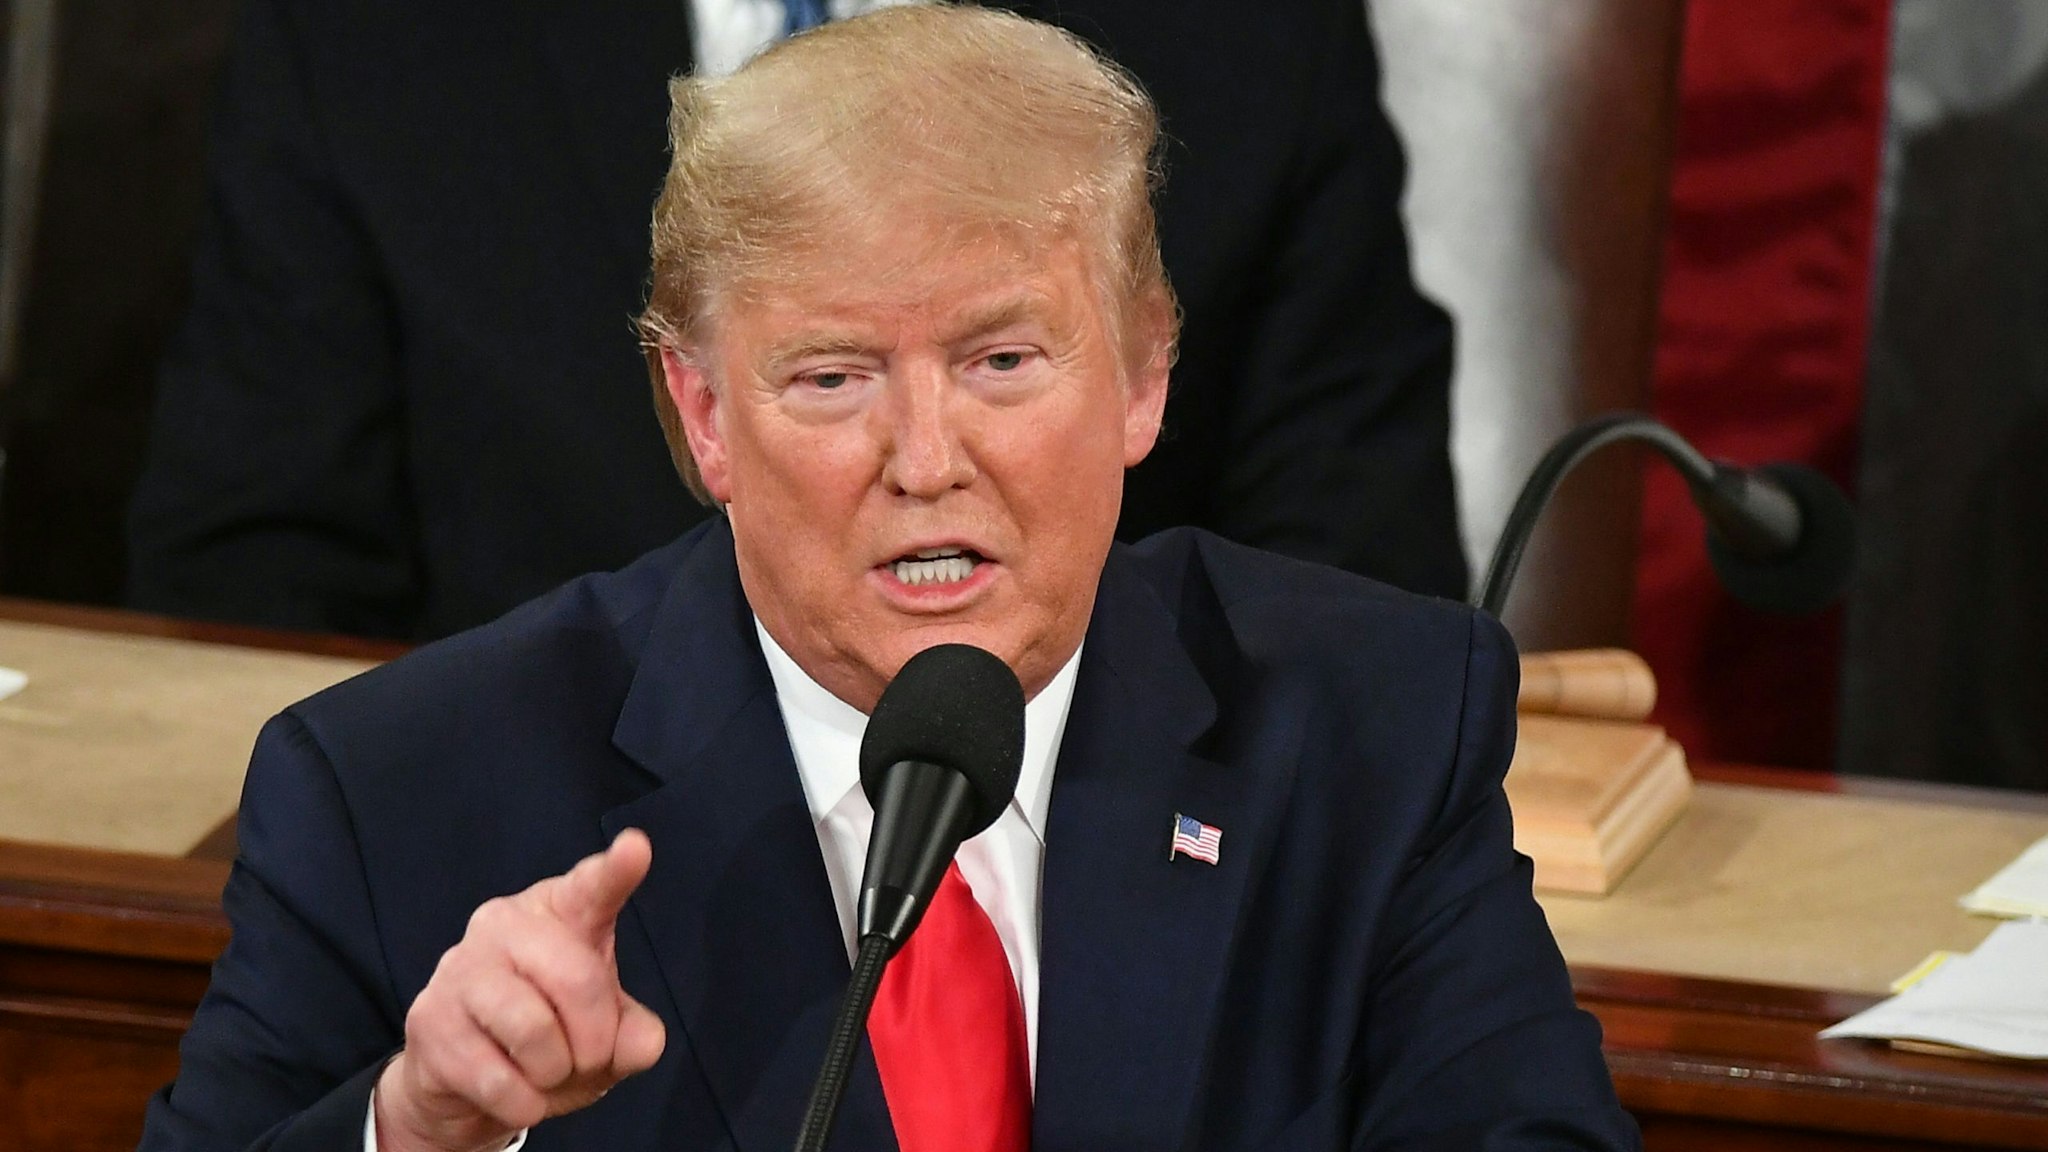 US President Donald Trump delivers his State of the Union address at the US Capitol in Washington, DC, on February 4, 2020.